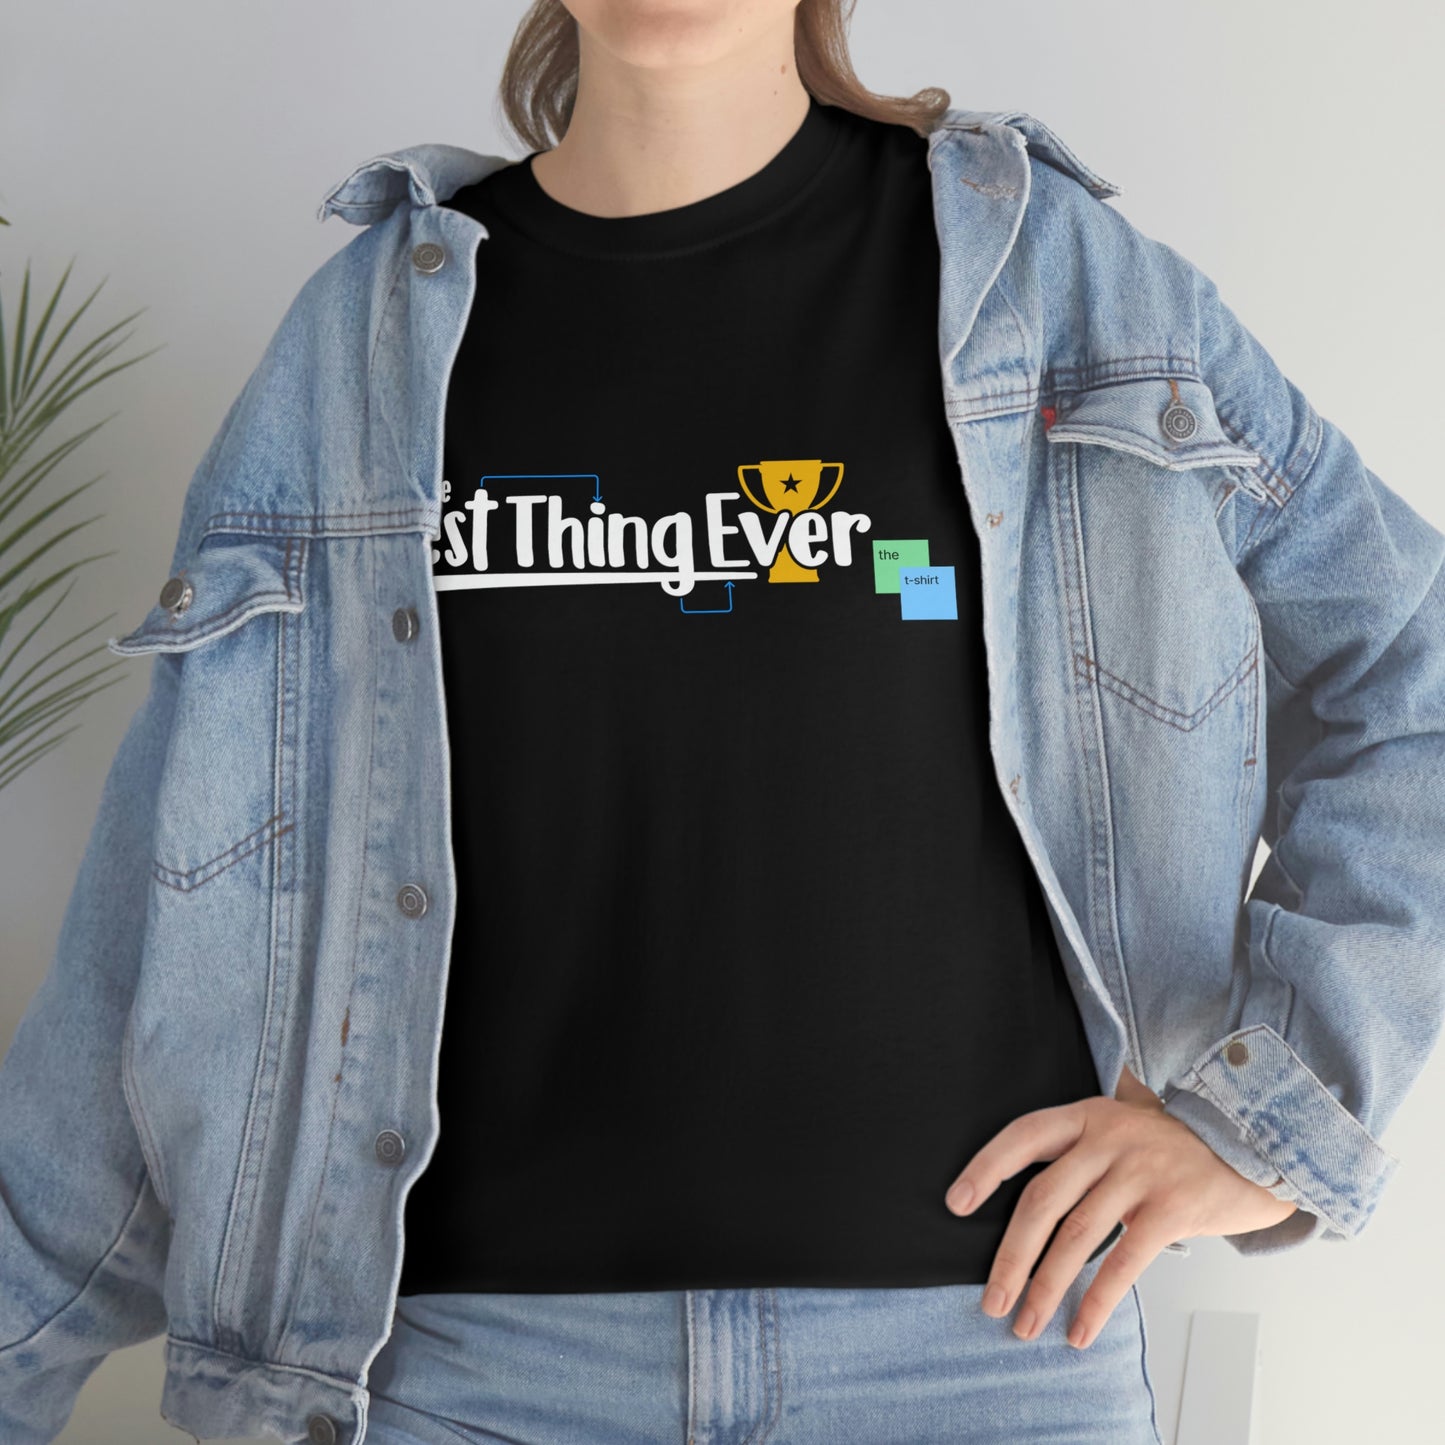 The Best Thing Ever - The T-shirt